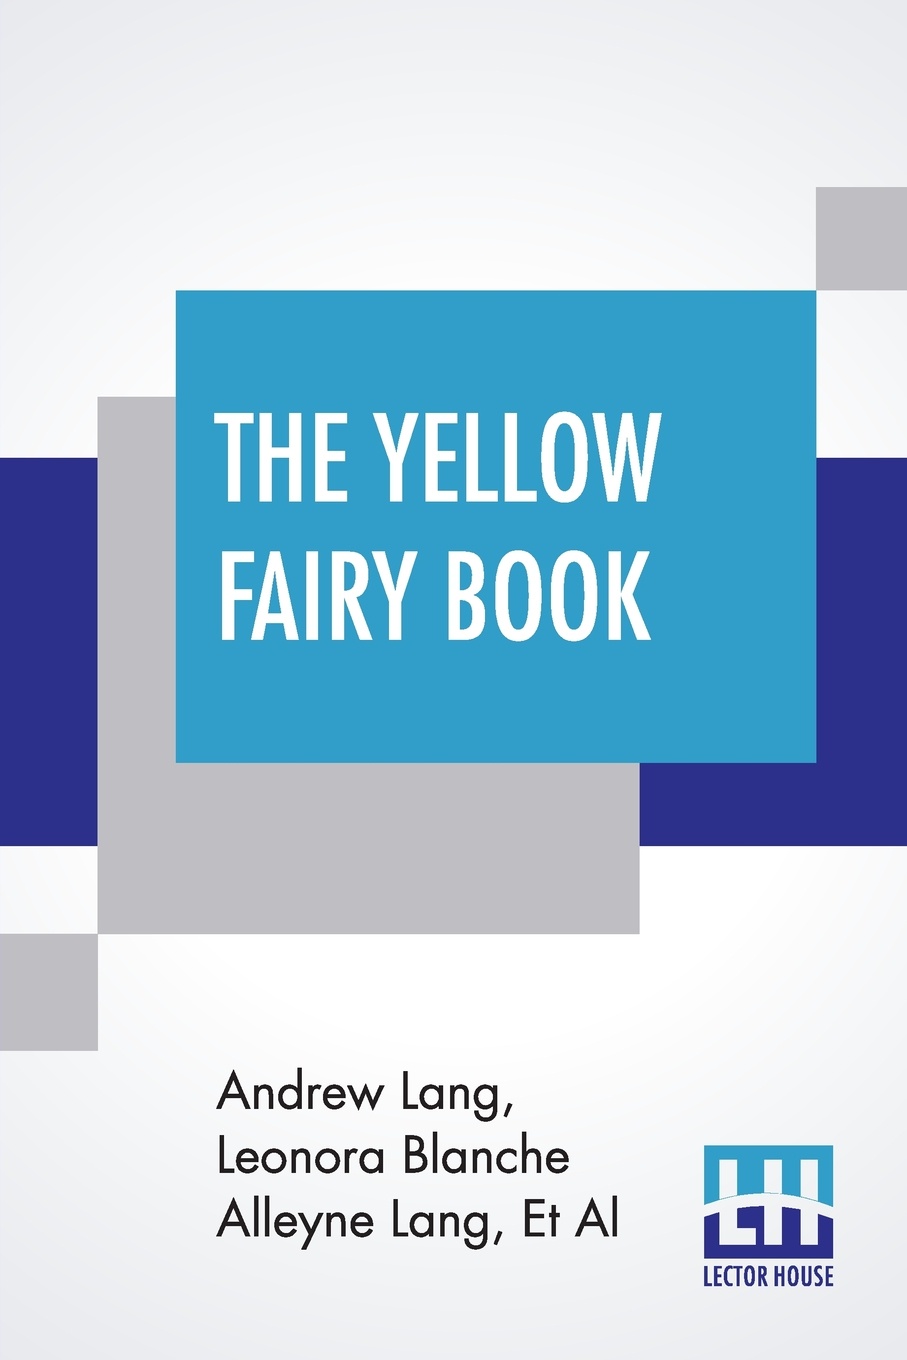 The Yellow Fairy Book. Edited By Andrew Lang